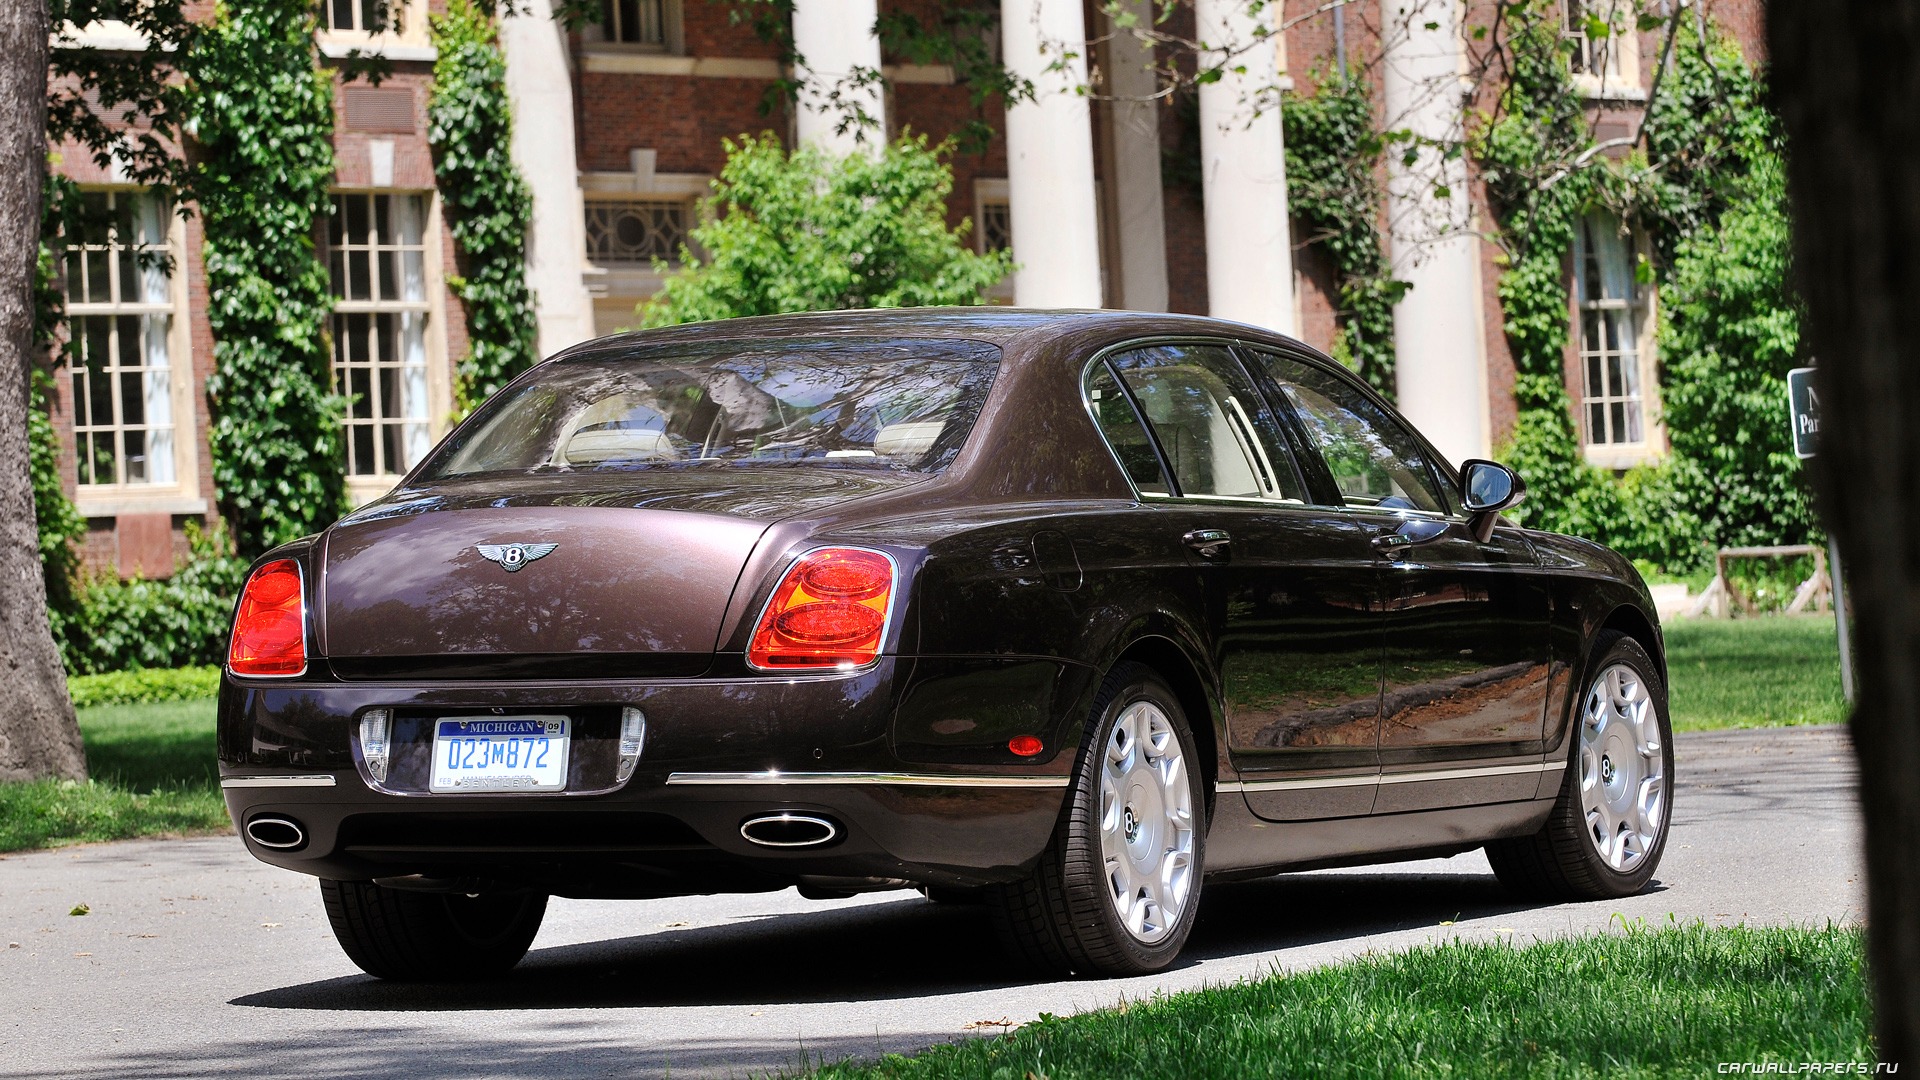 Bentley Continental Flying Spur - 2008 宾利15 - 1920x1080